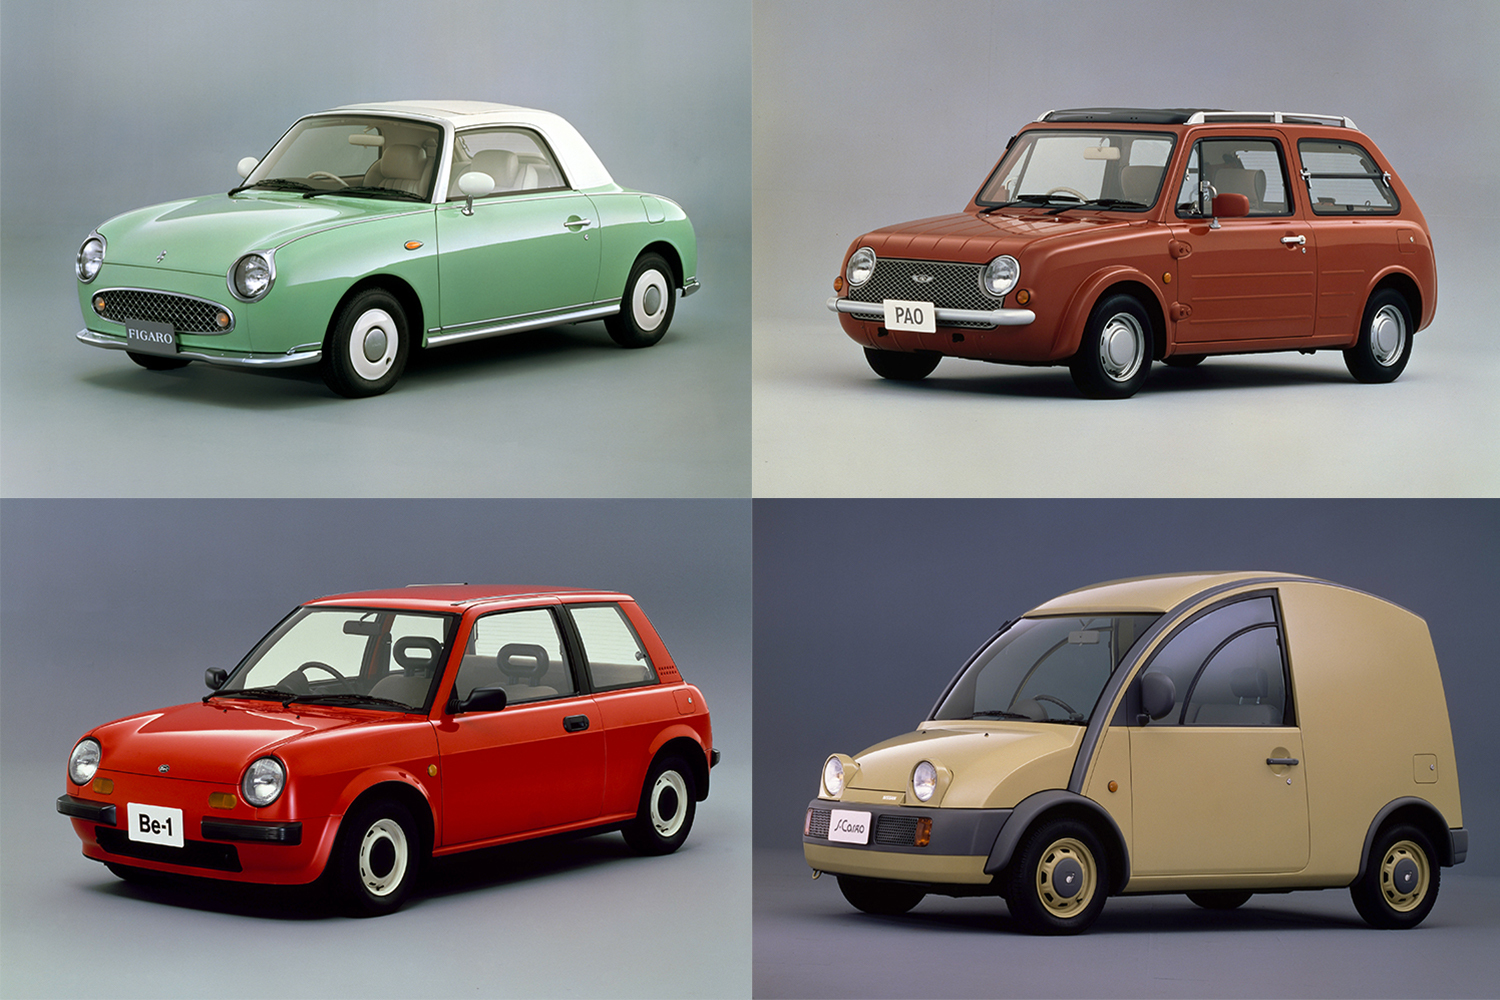 Nissan Pike Factory Cars: The Figaro, Pao, S-Cargo and Be-1.